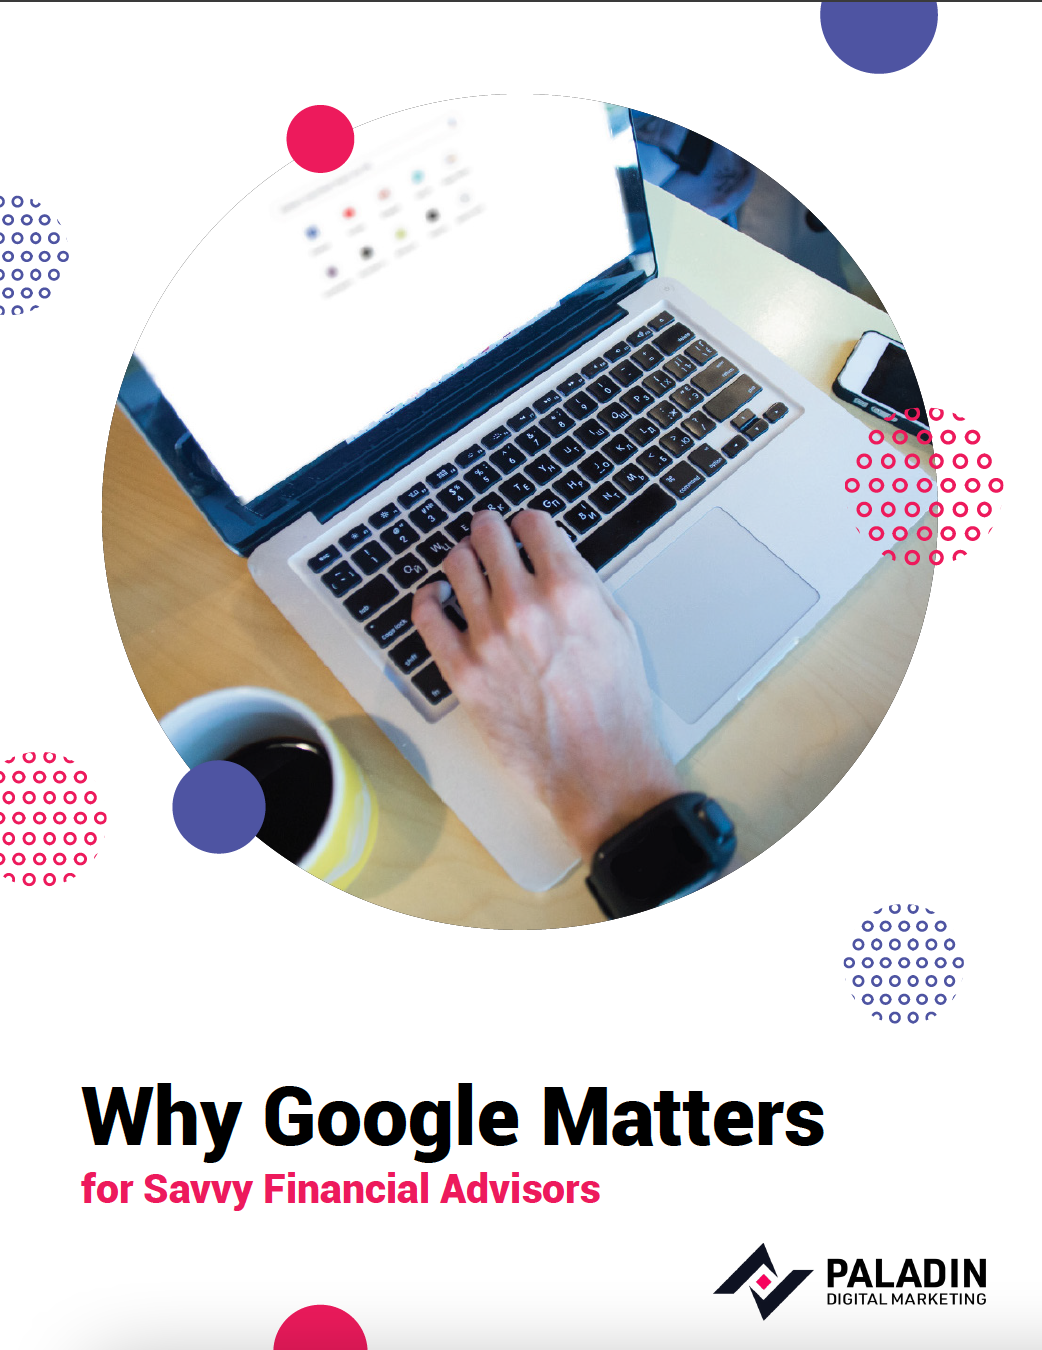 Why Google Matters For Savvy Financial Advisors